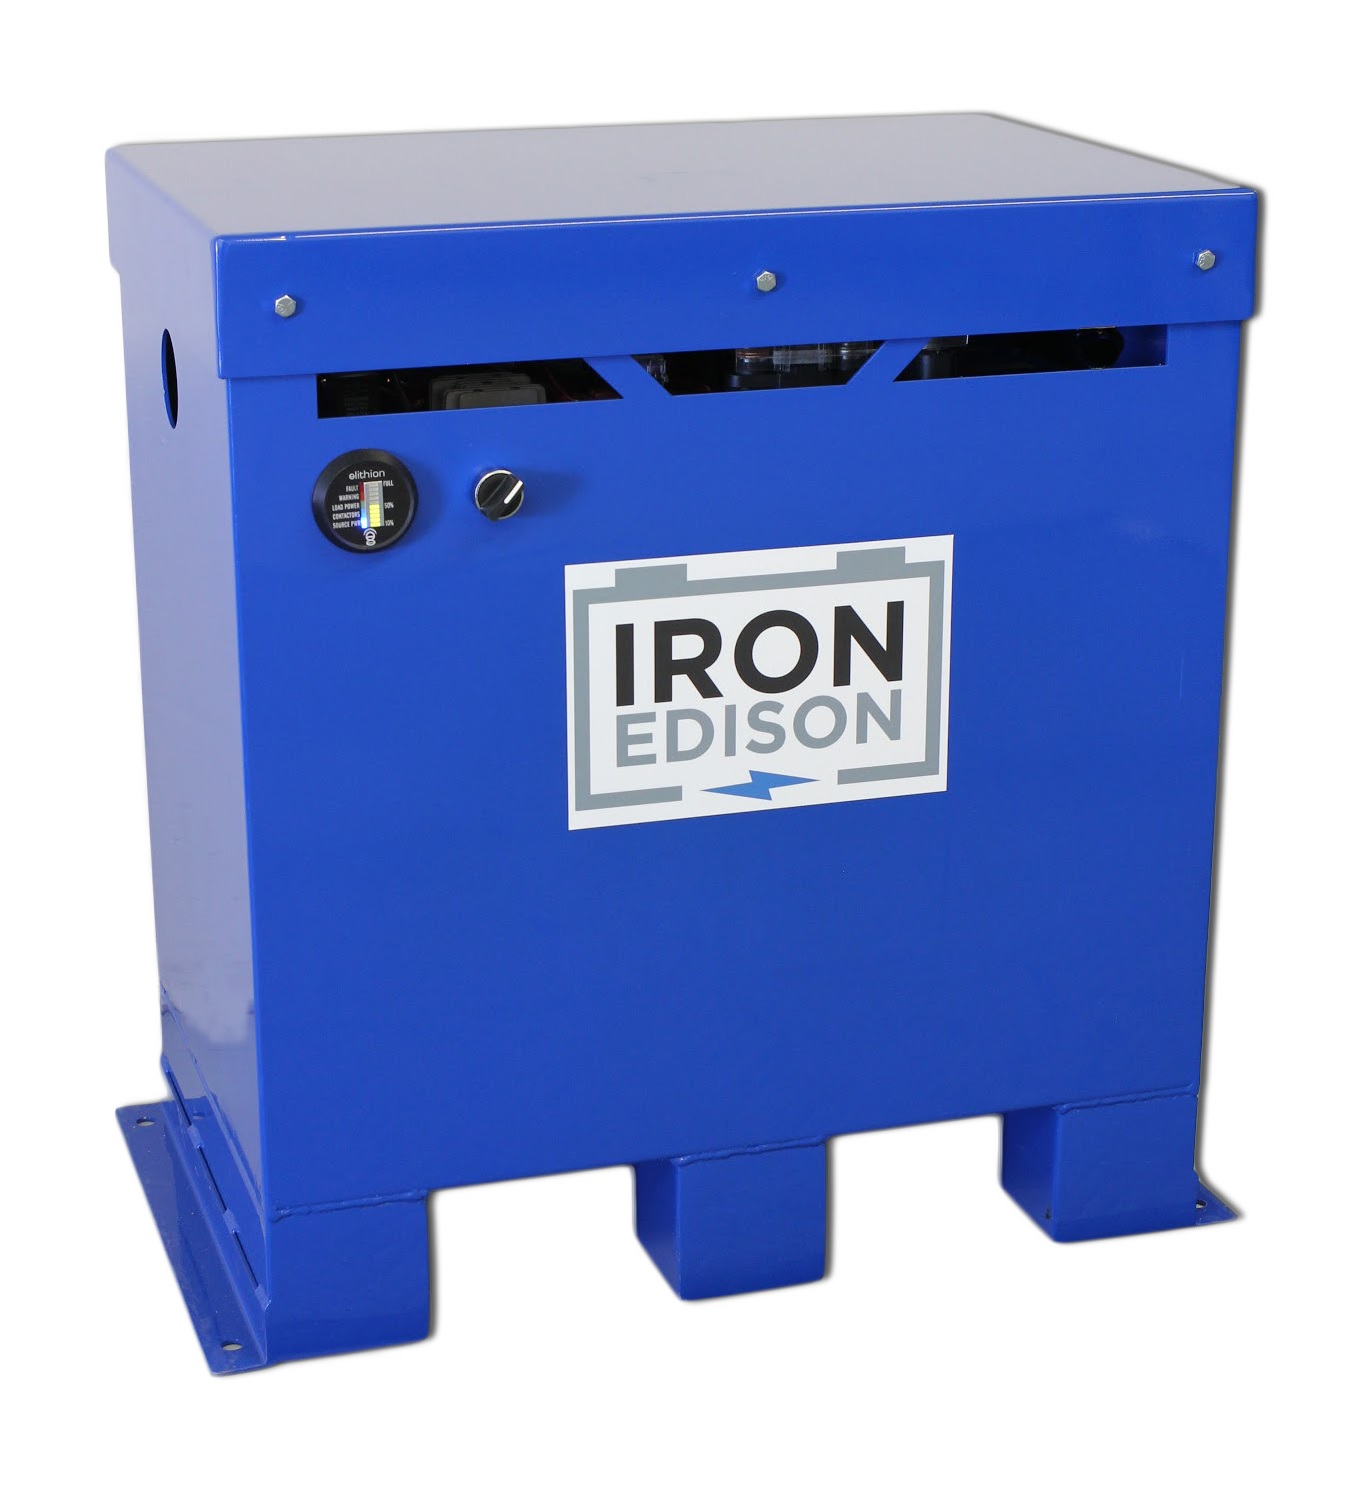 The Iron Edison Lithium Iron Phosphate battery for solar and off-grid use is the safest of any Lithium Ion battery chemistry.